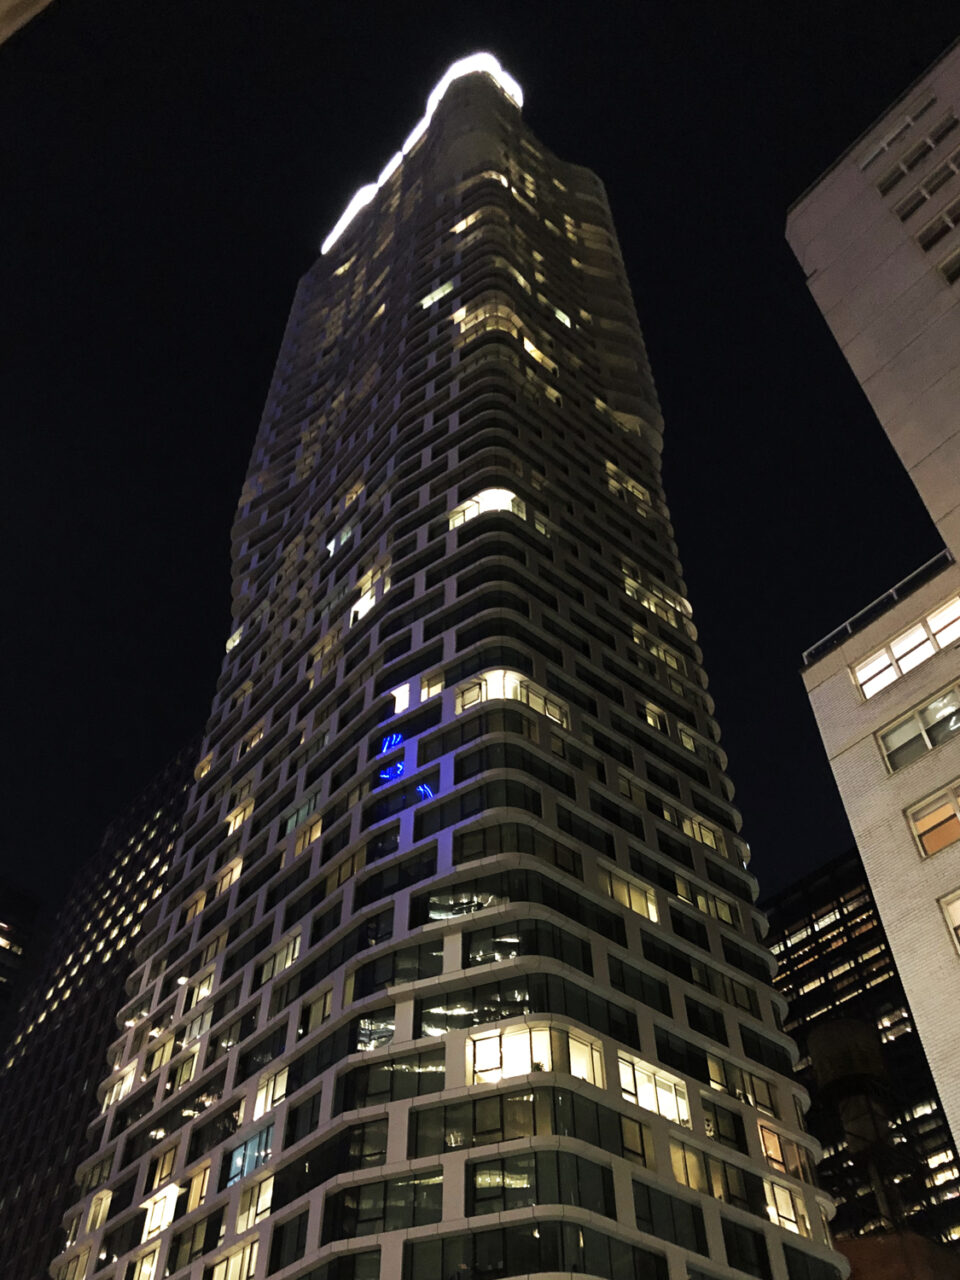 Night view of 242-West-53rd Street, New York. CentraRuddy Architecture, custom unitized rainscreen system by Riverside Group.